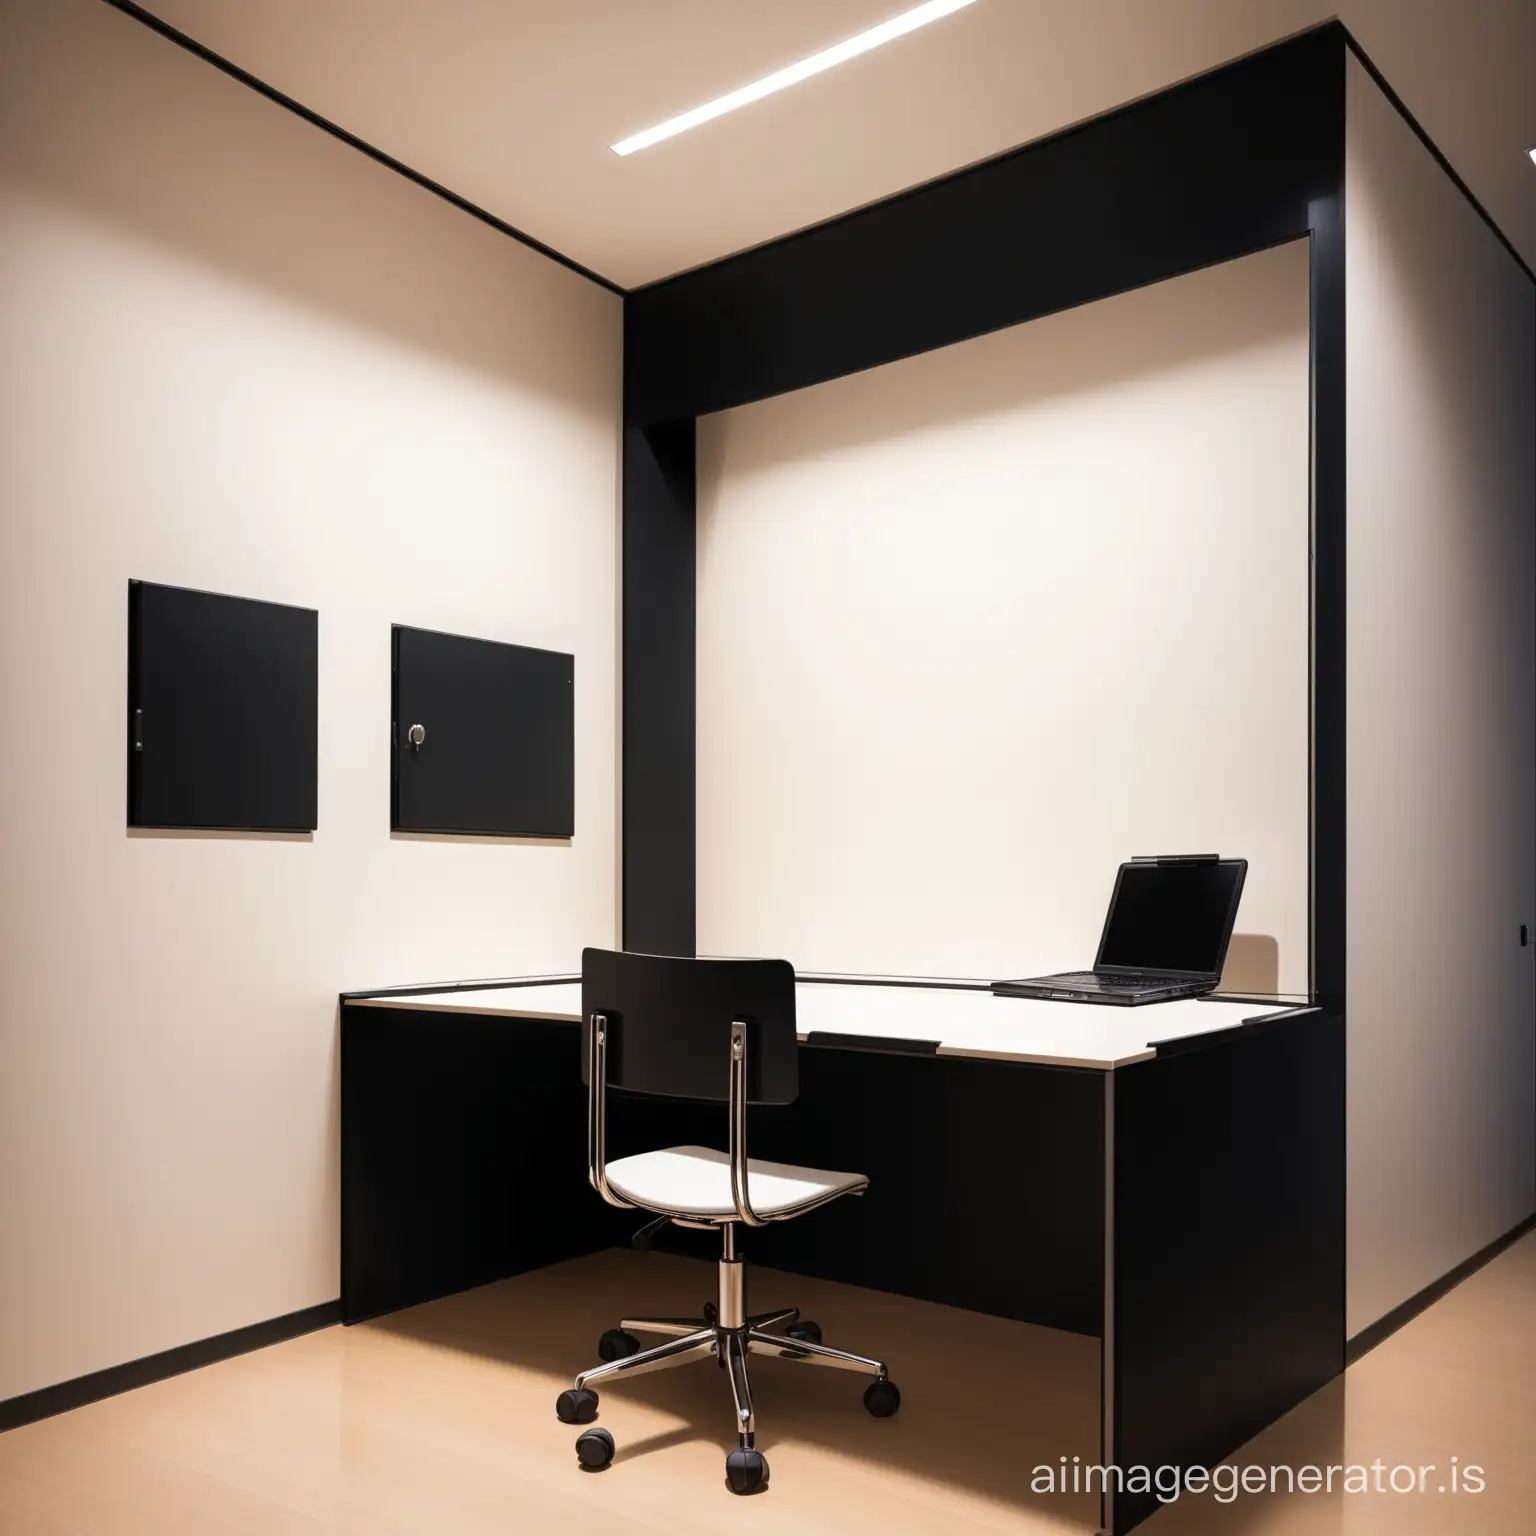 a child study room  with completely black square space on the wall behind the desk